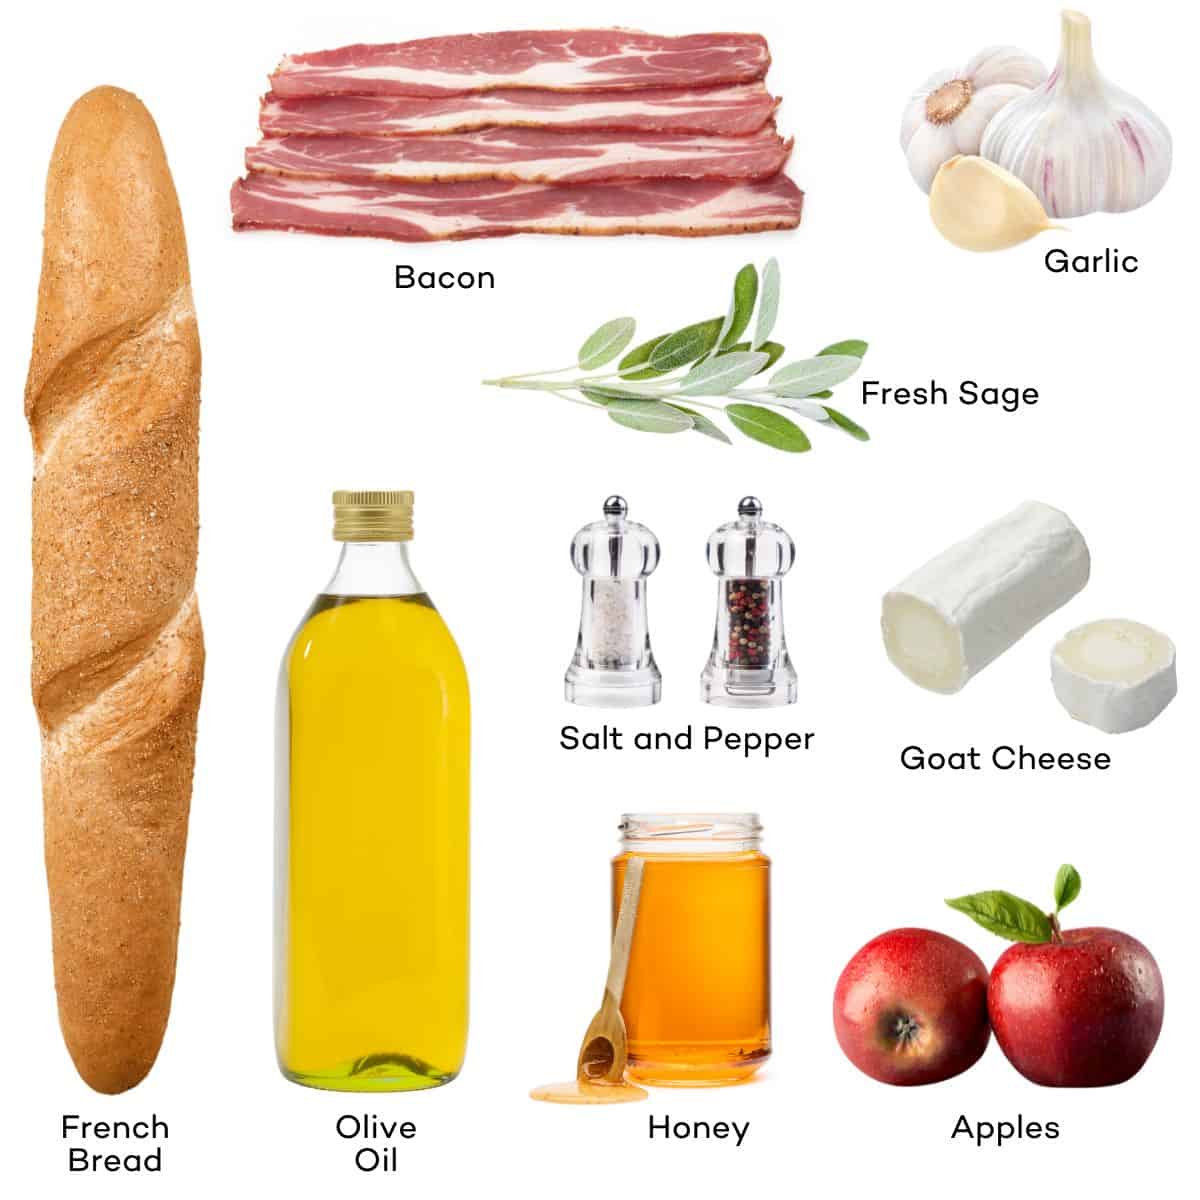 Ingredients for Apple, Bacon, and Goat Cheese Crostini - French bread, olive oil, honey, apples, goat cheese, bacon, garlic, sage, salt, pepper. 